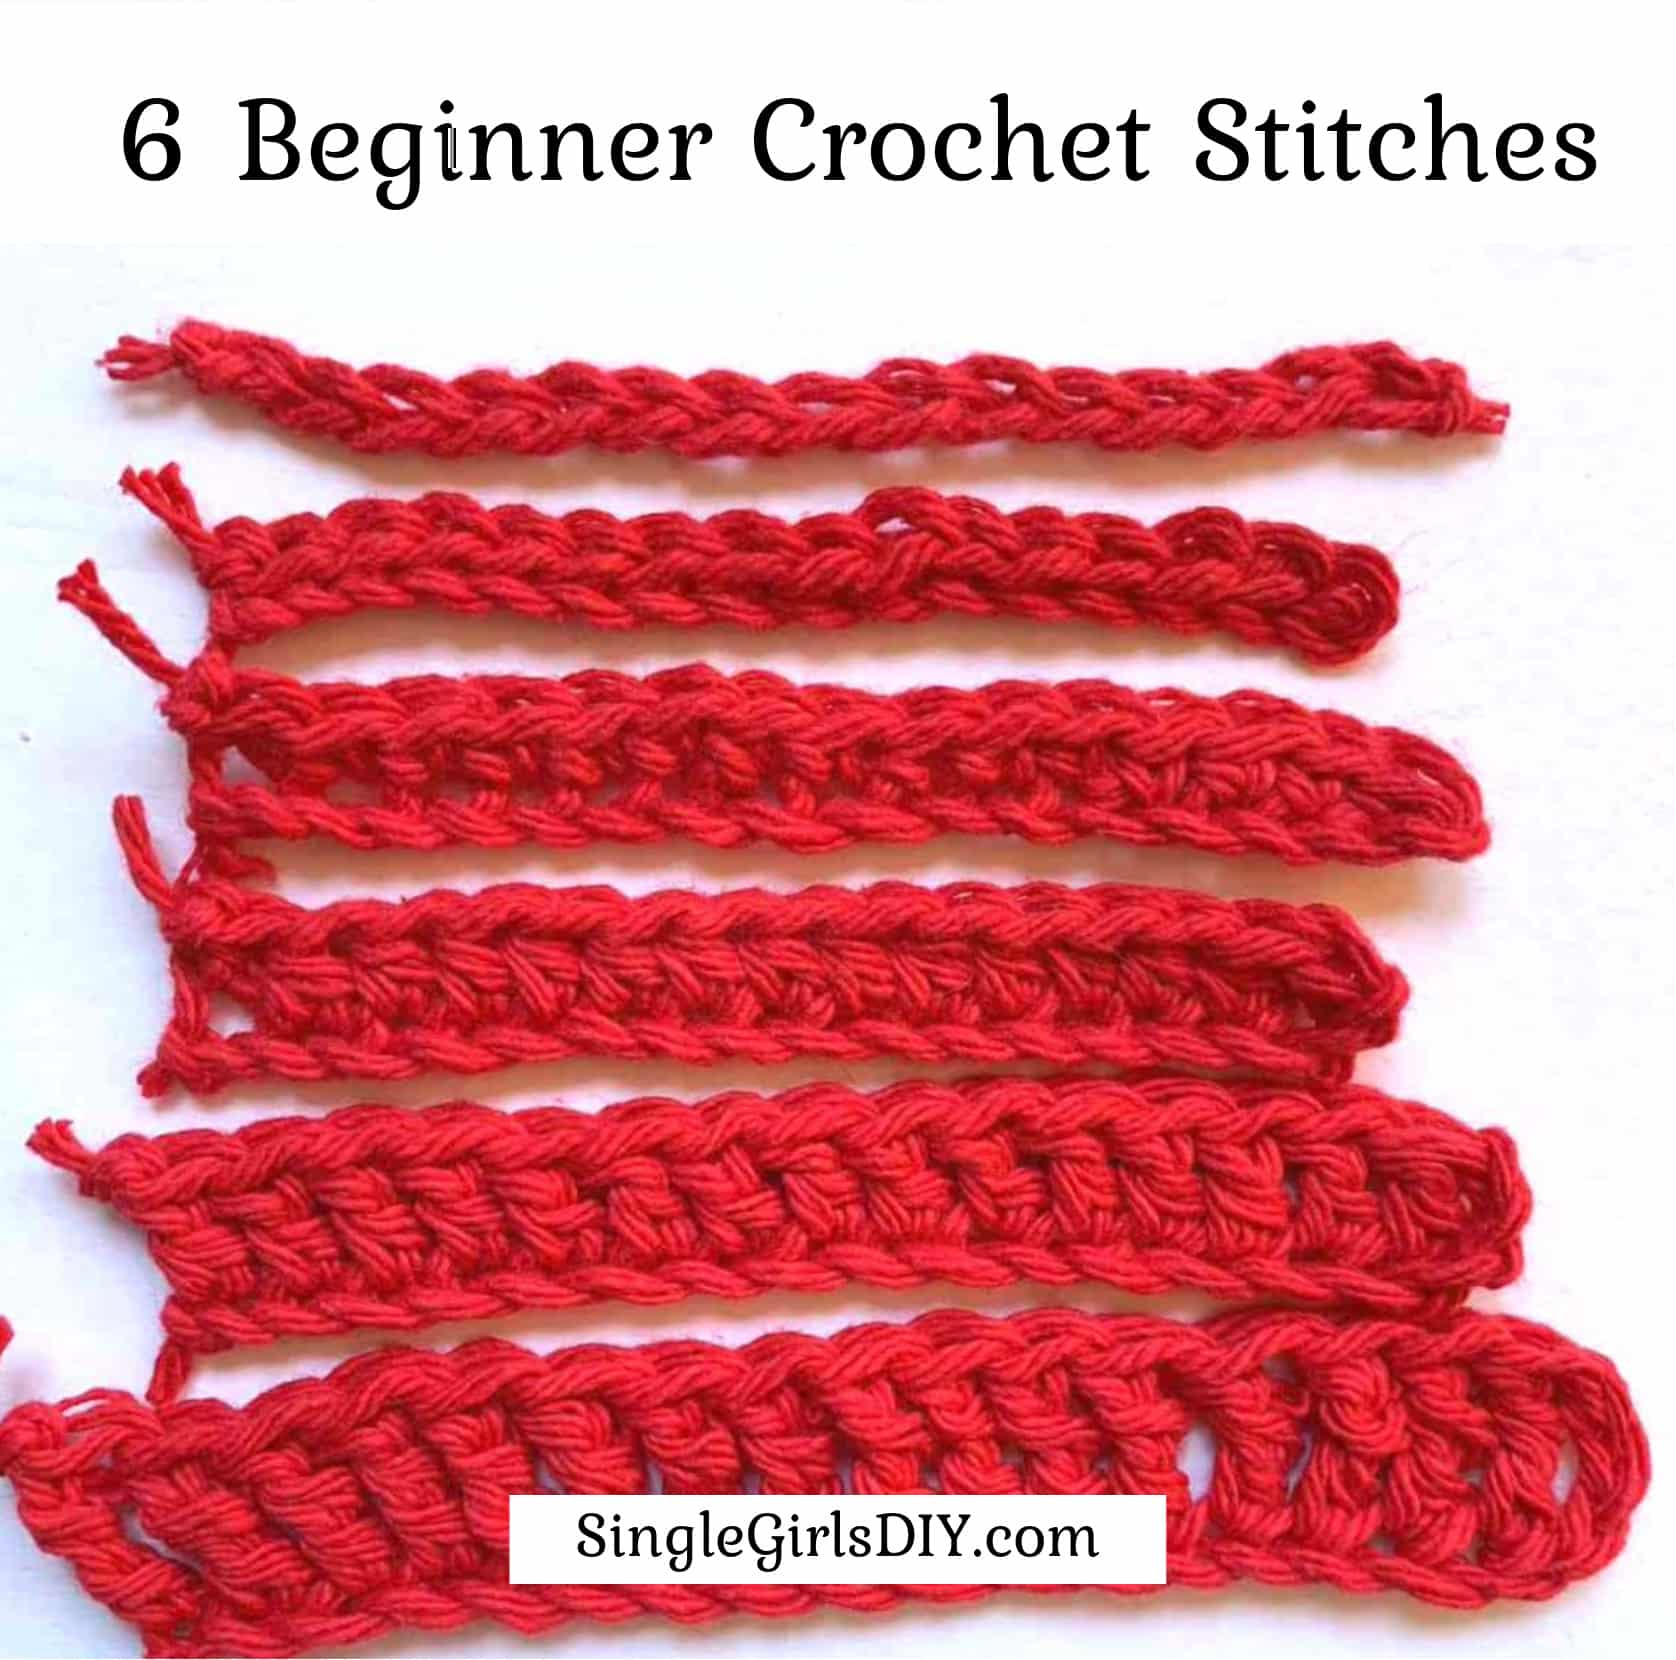 6 Beginner Crochet Stitches: The Basics You Need to Learn - Single Girl's  DIY